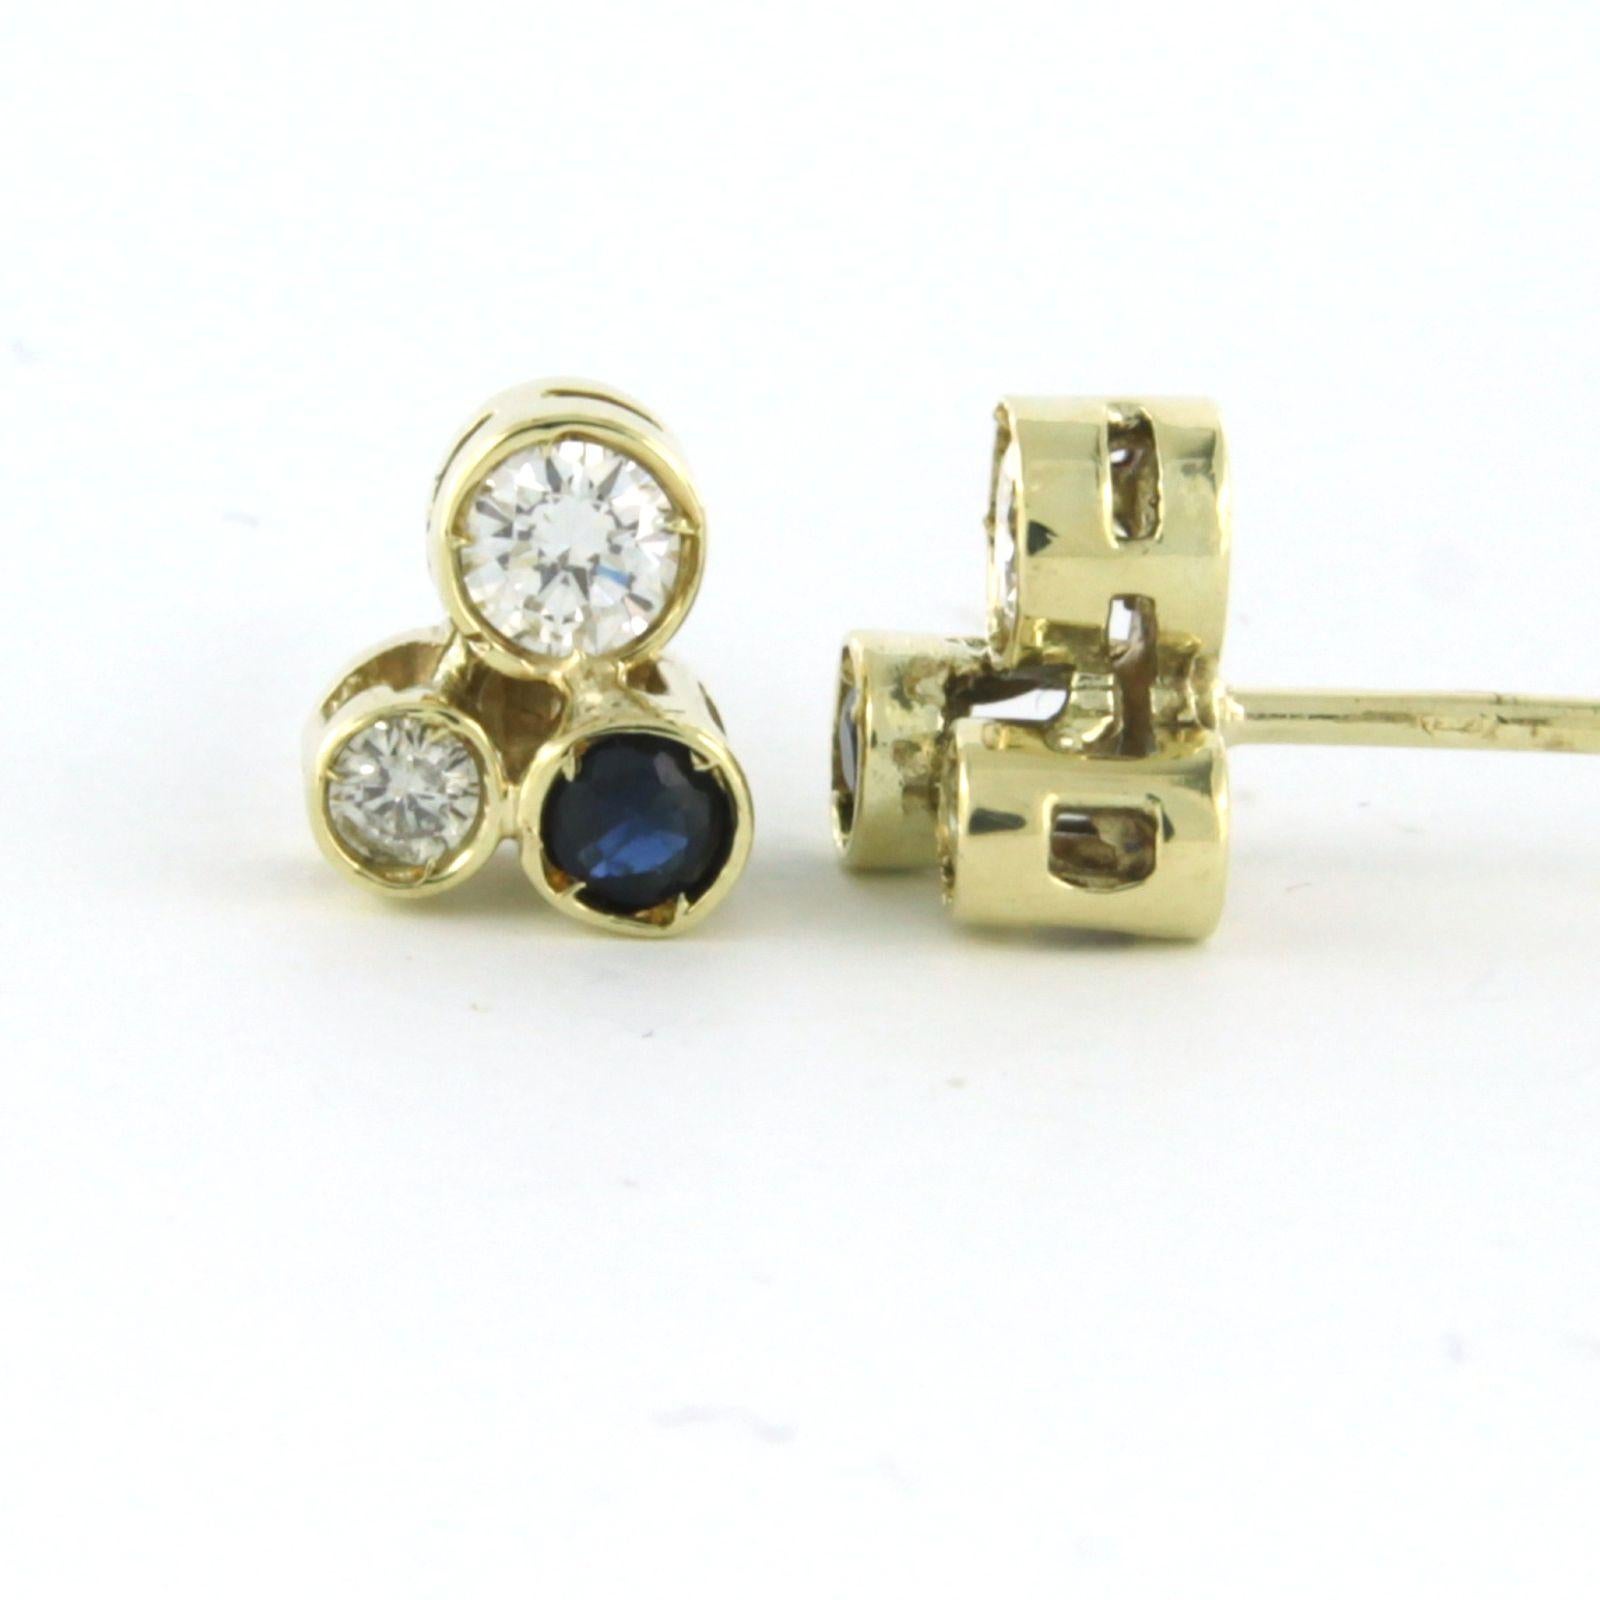 Modern Earrings stud set with sapphire and diamonds 14k yellow gold